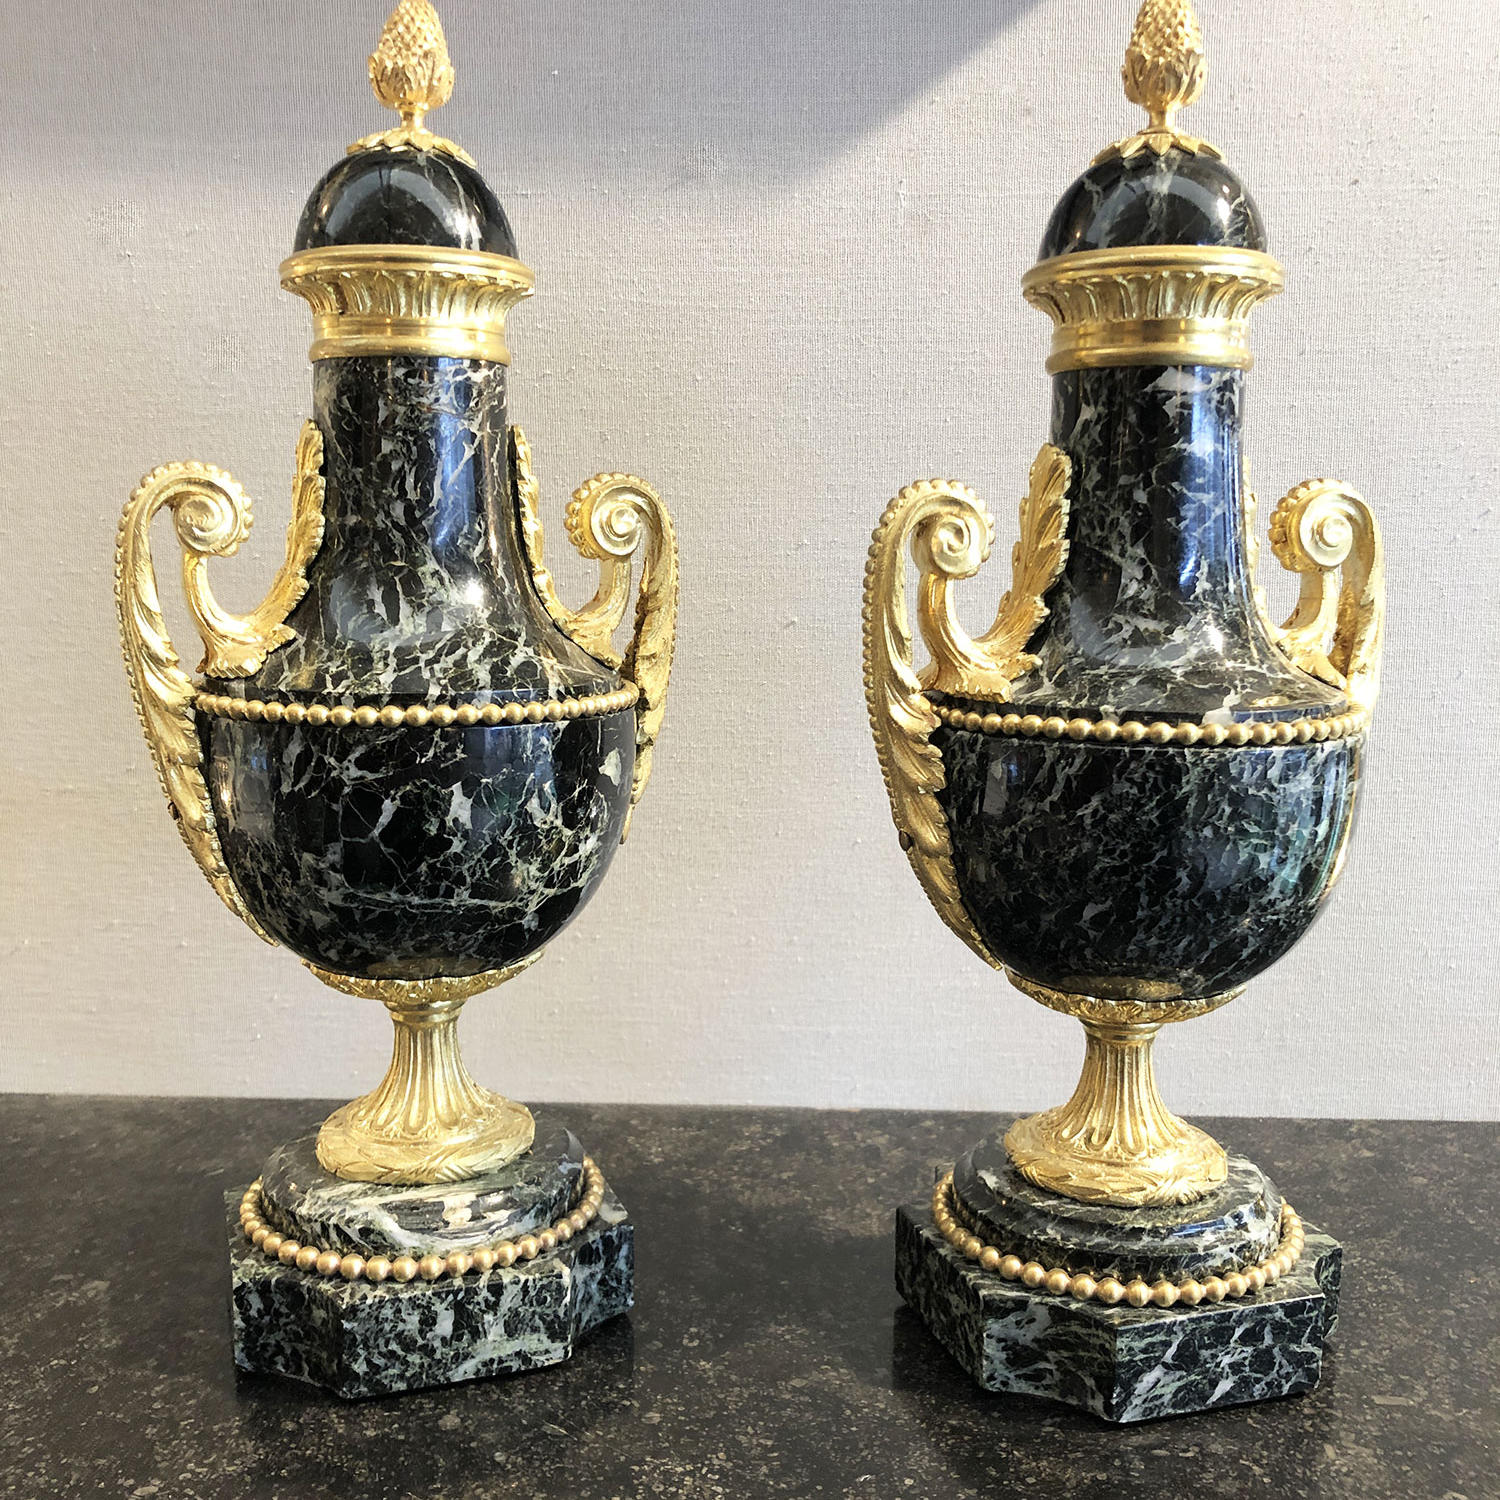 Pair of Marble and Gilt Bronze Urns, 19th Century